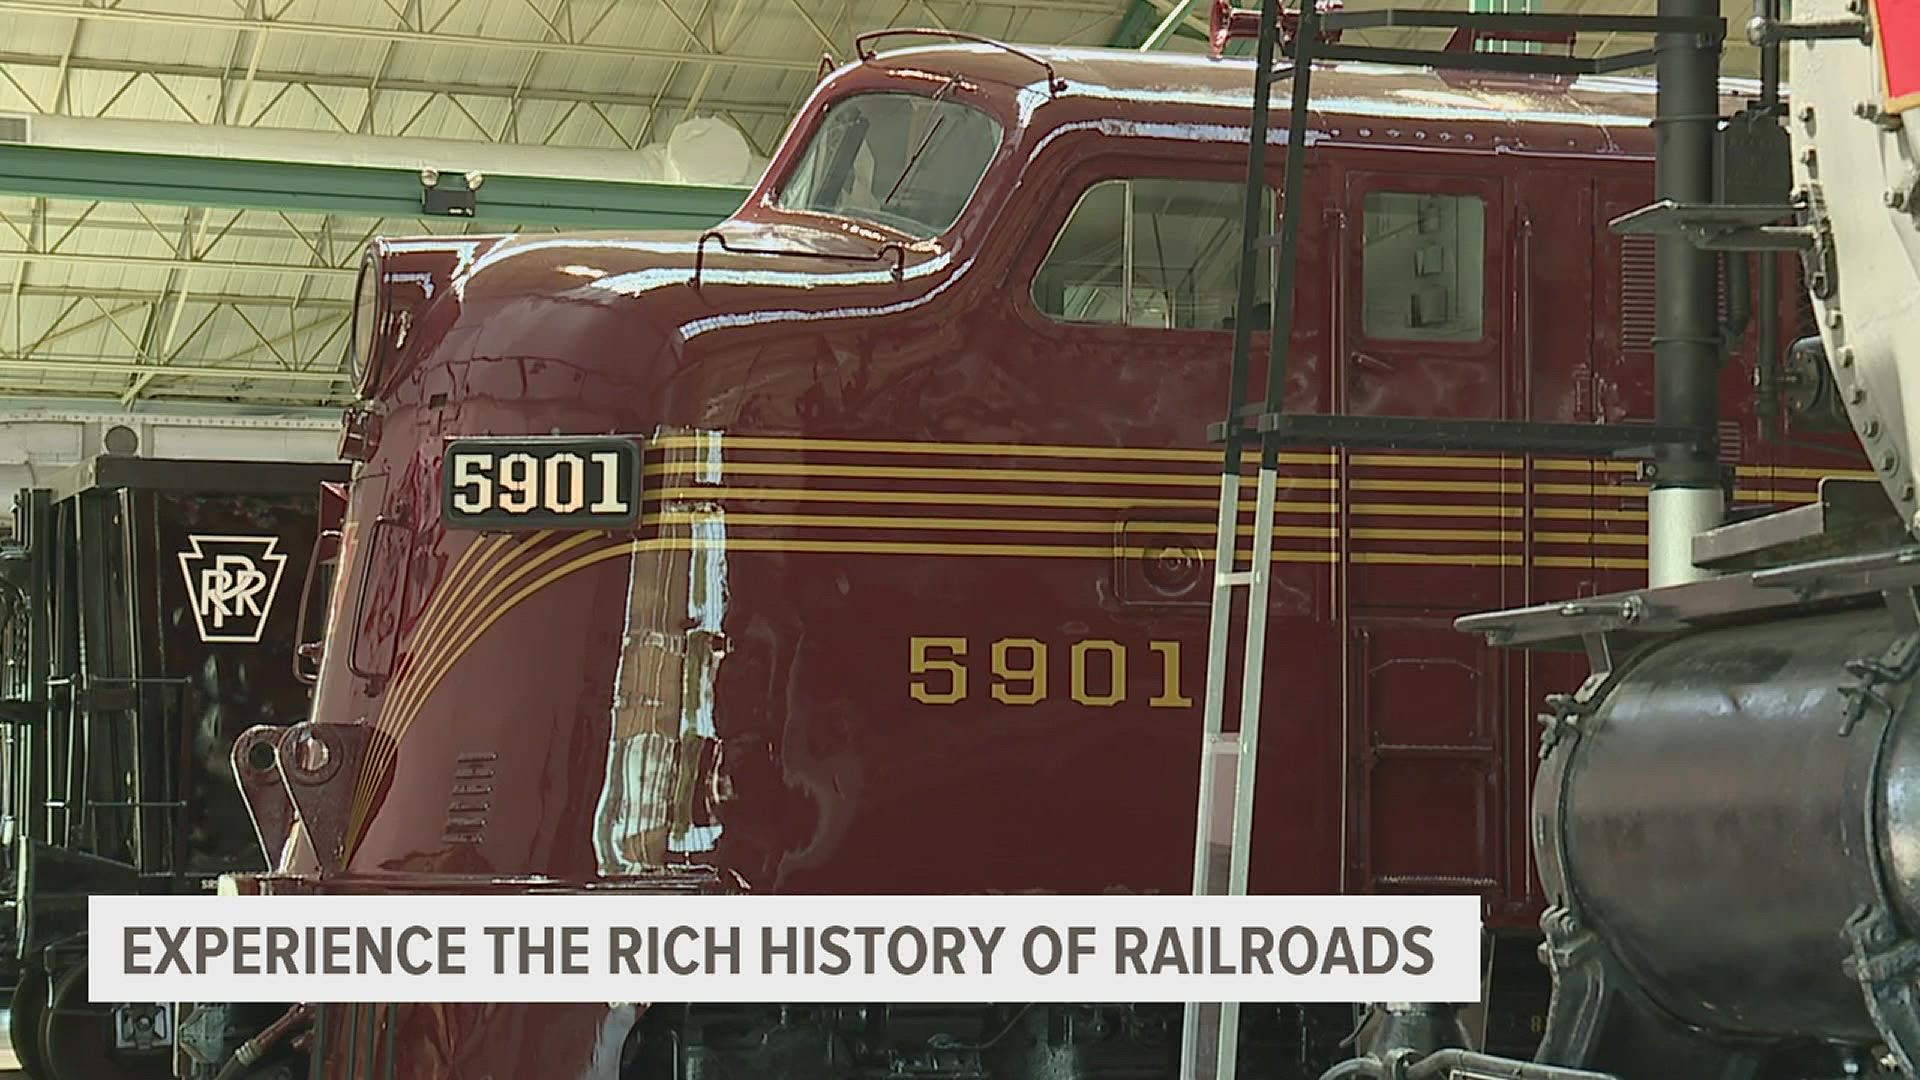 With rising gas prices, consider traveling to historic Strasburg for their unique railroads and notable museum